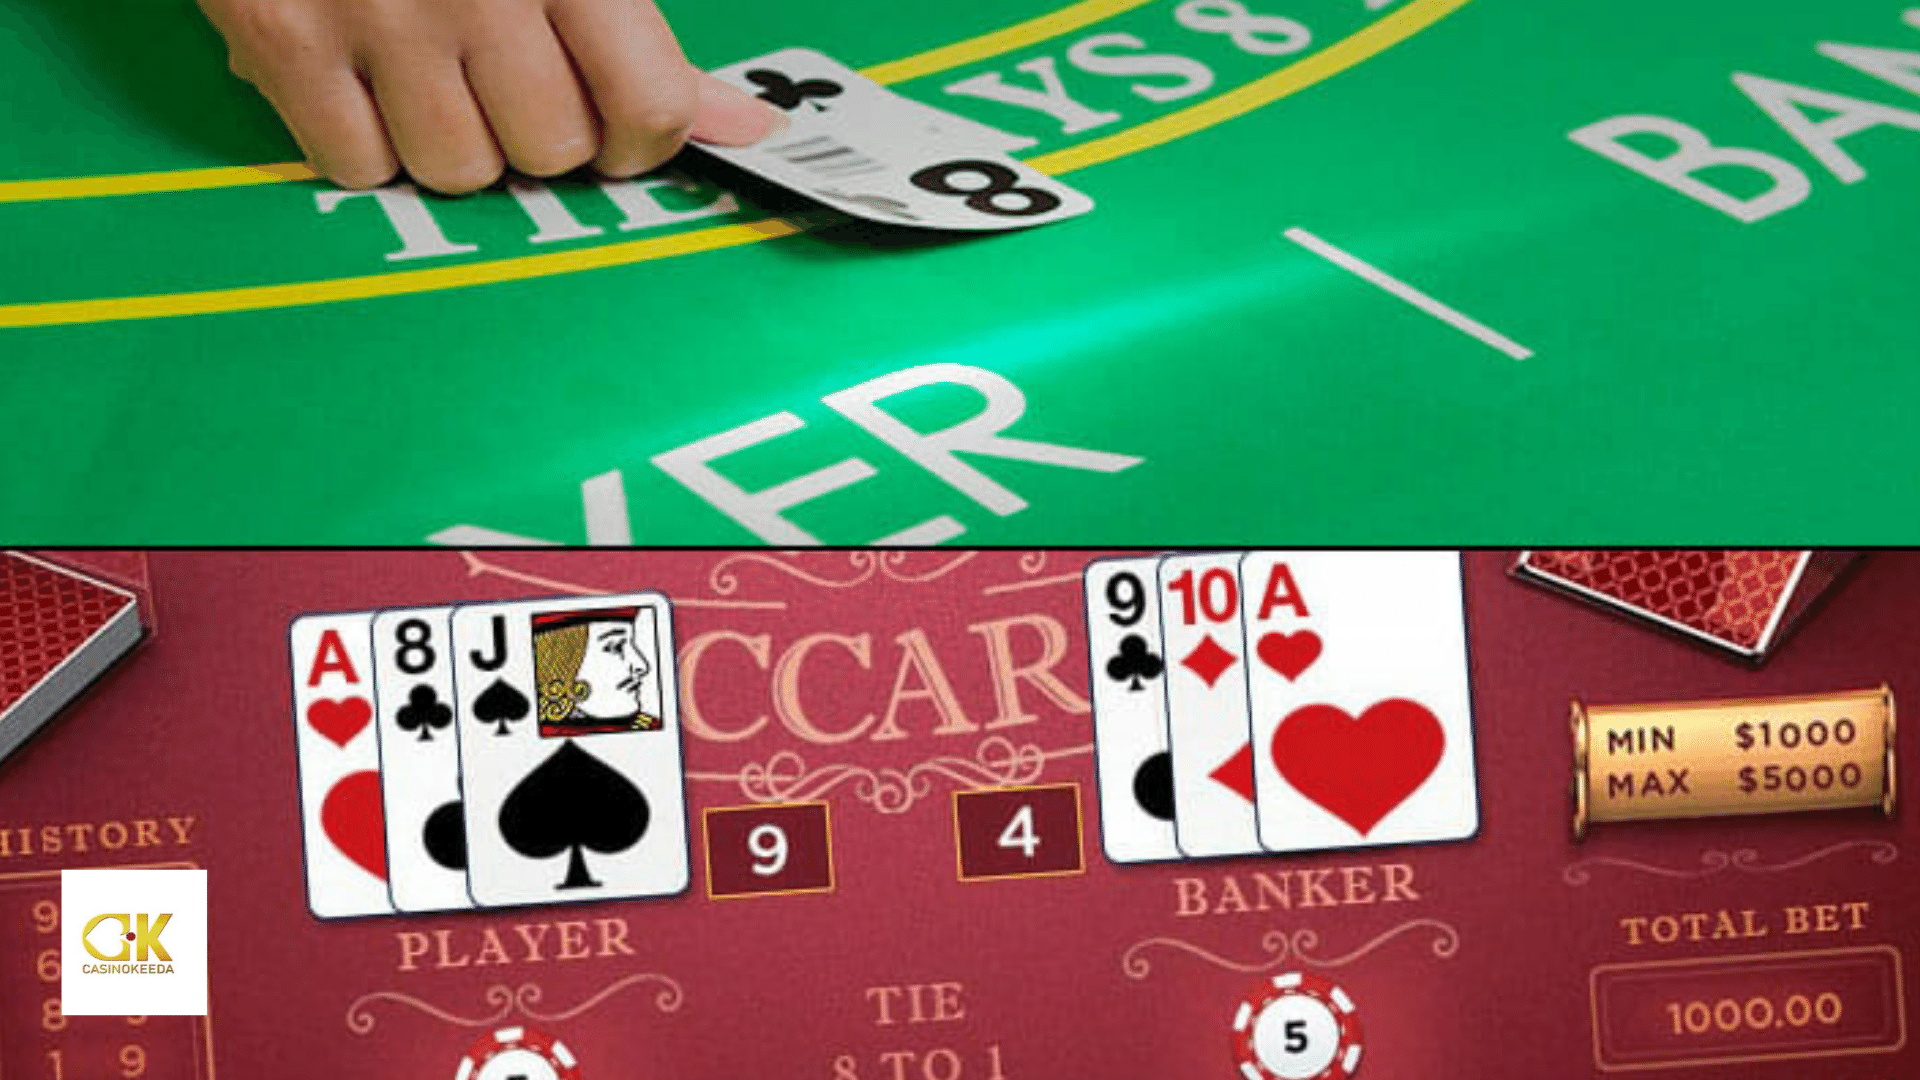 Rules Of Baccarat